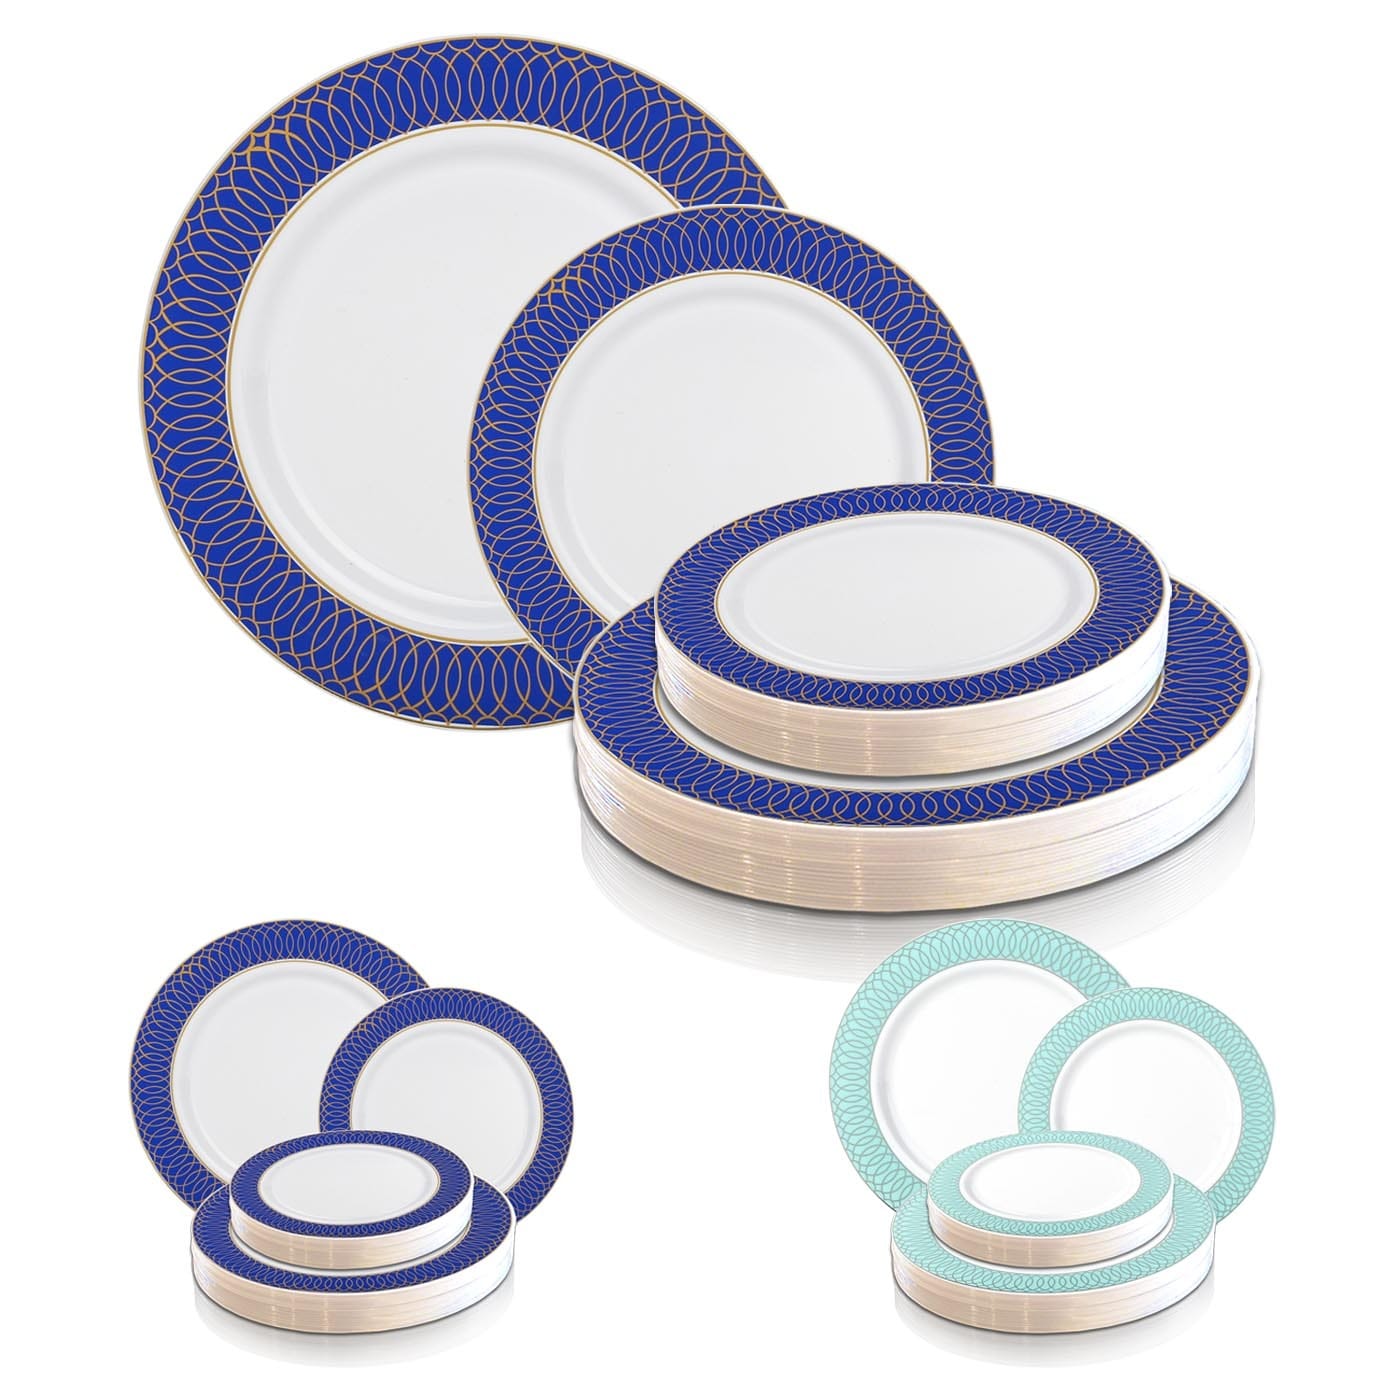 White with Blue and Gold Royal Rim Disposable Plastic Dinner Plates (10.25)